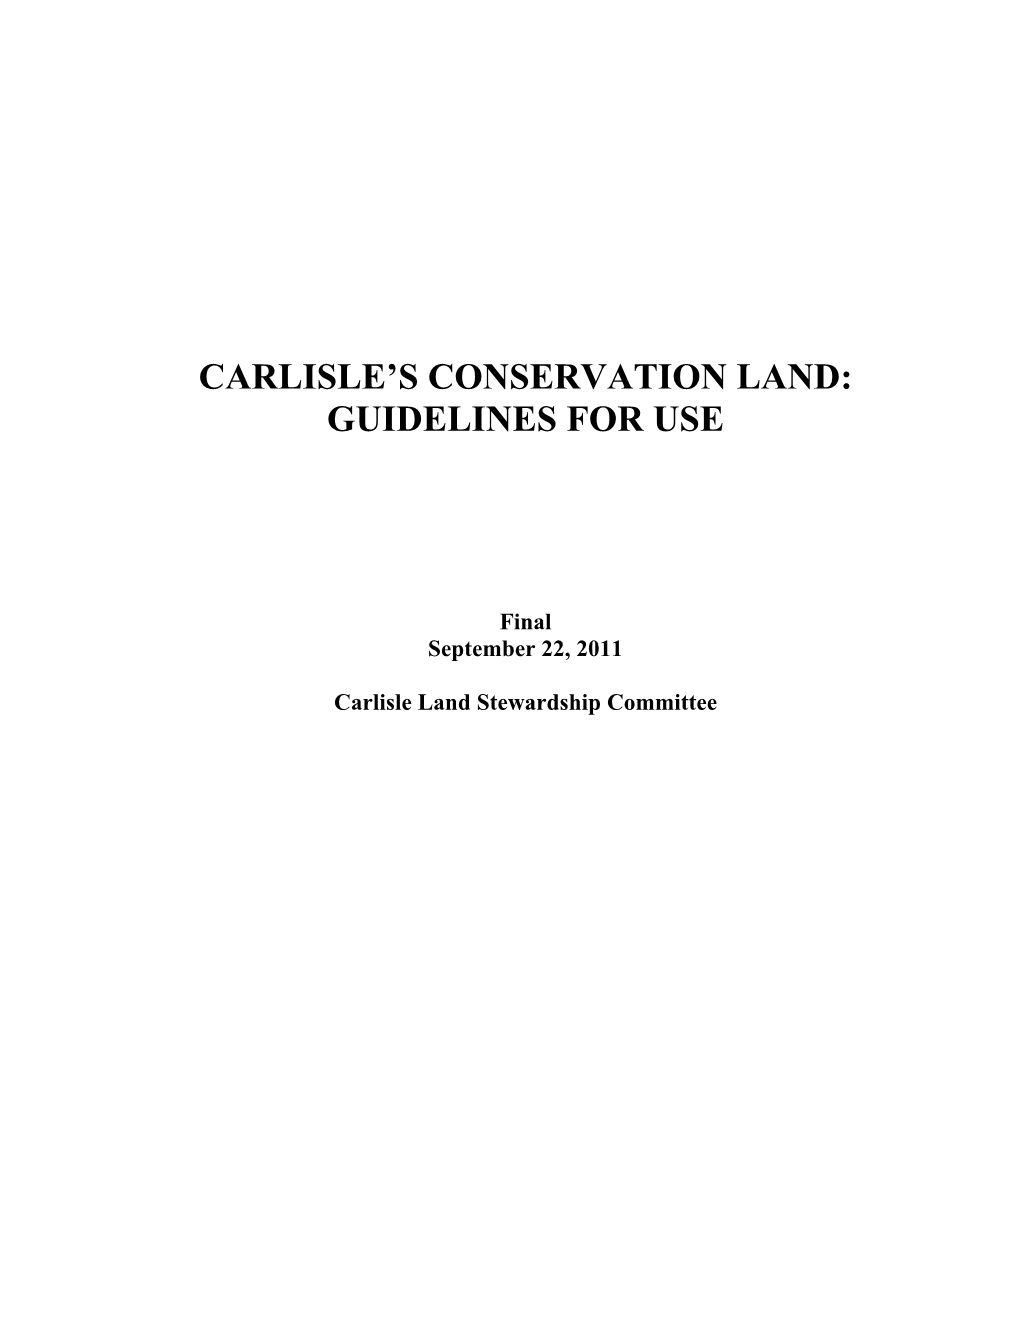 Carlisle's Conservation Land: Guidelines For